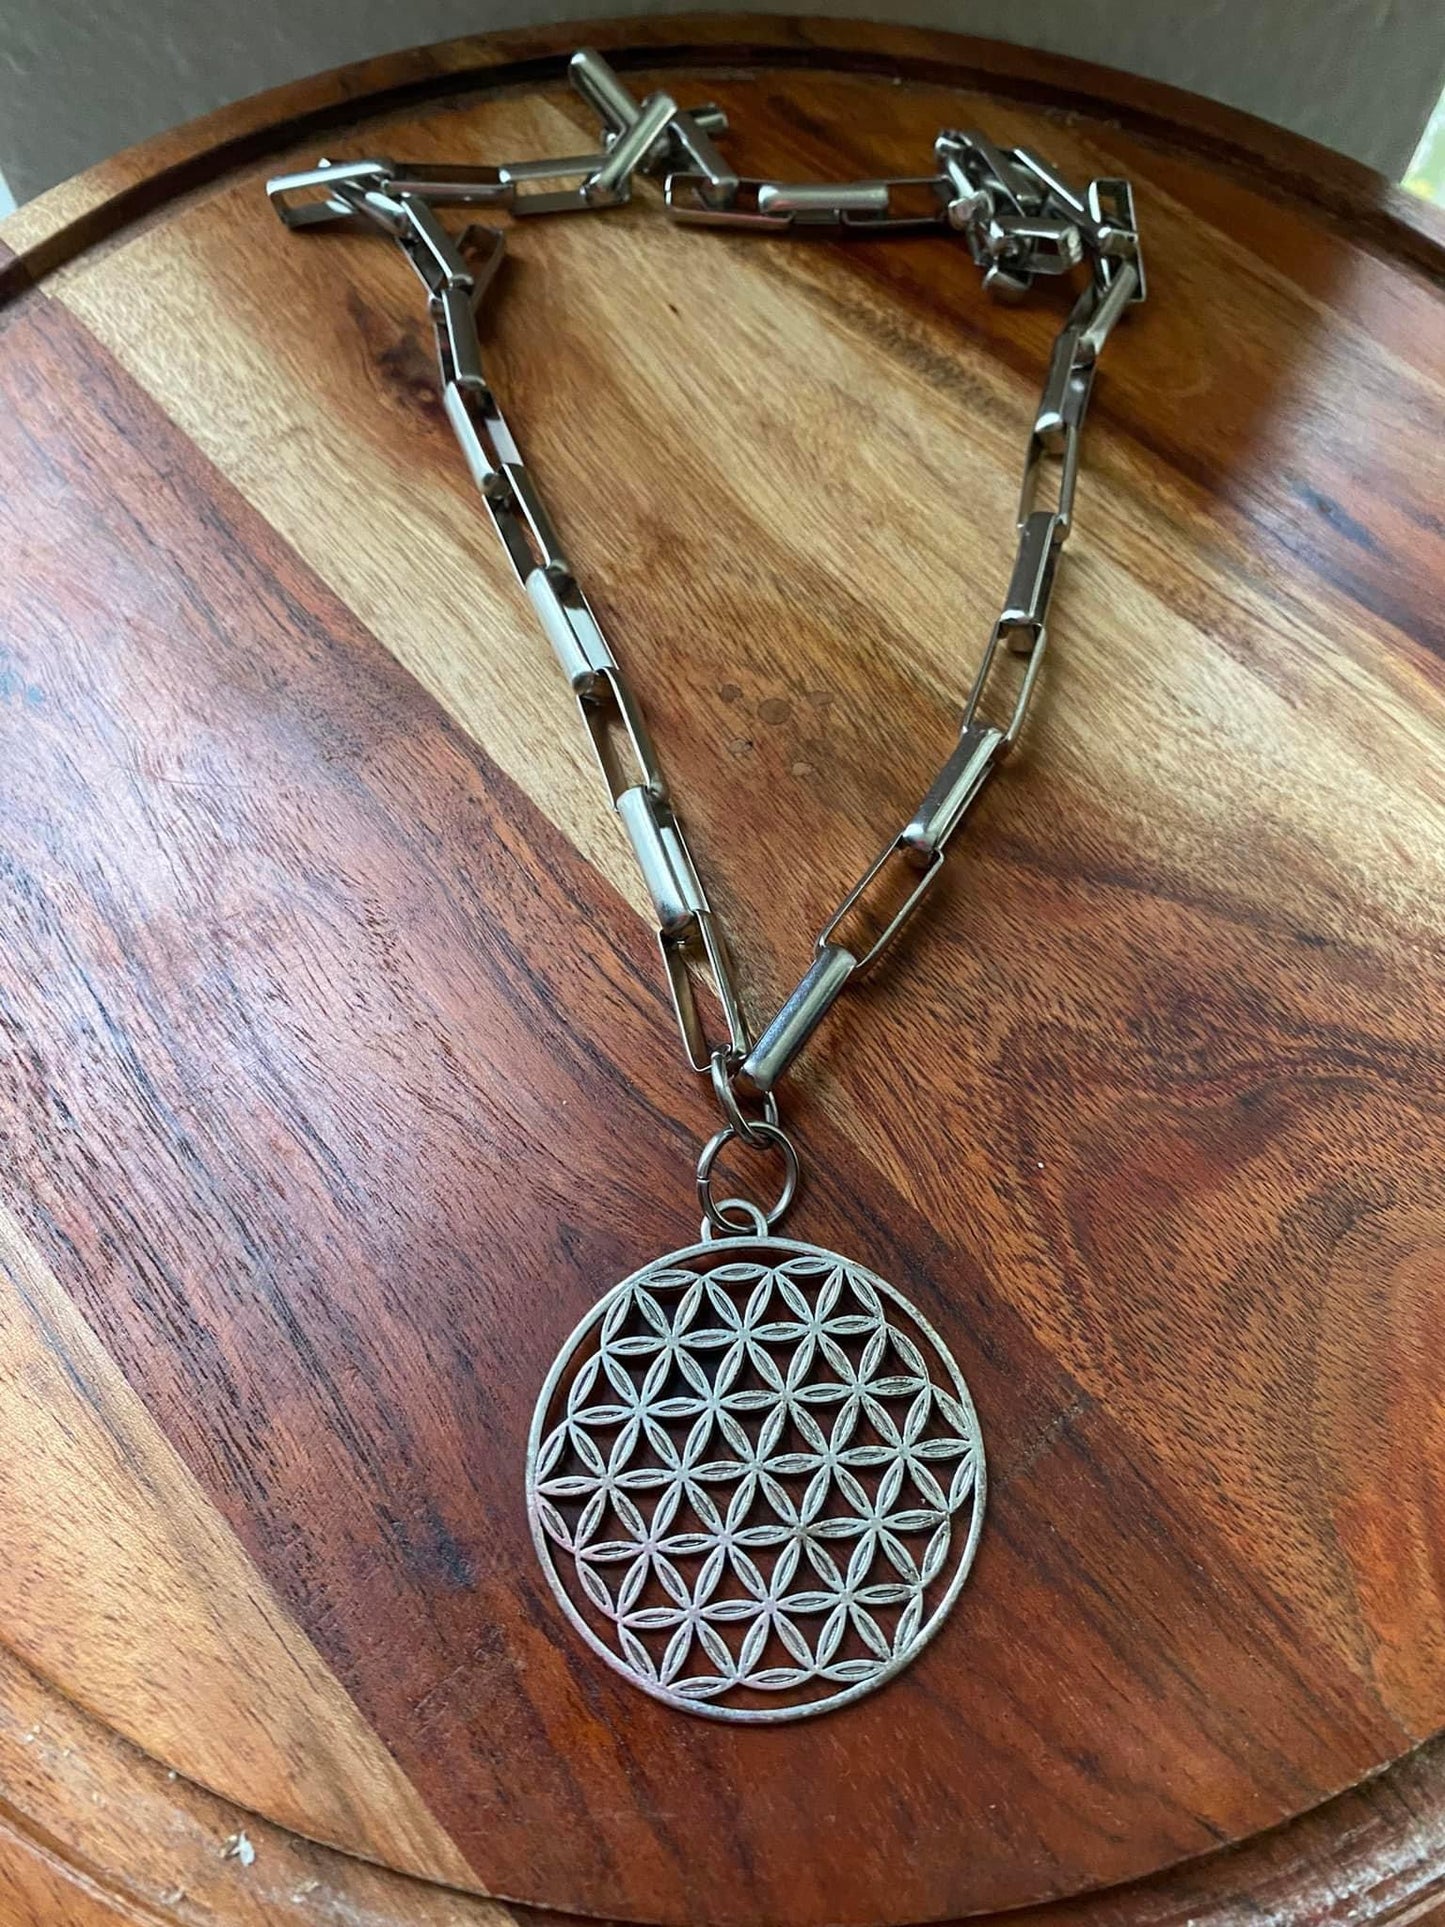 FLOWER OF LIFE ON BIKER CHAIN NECKLACE